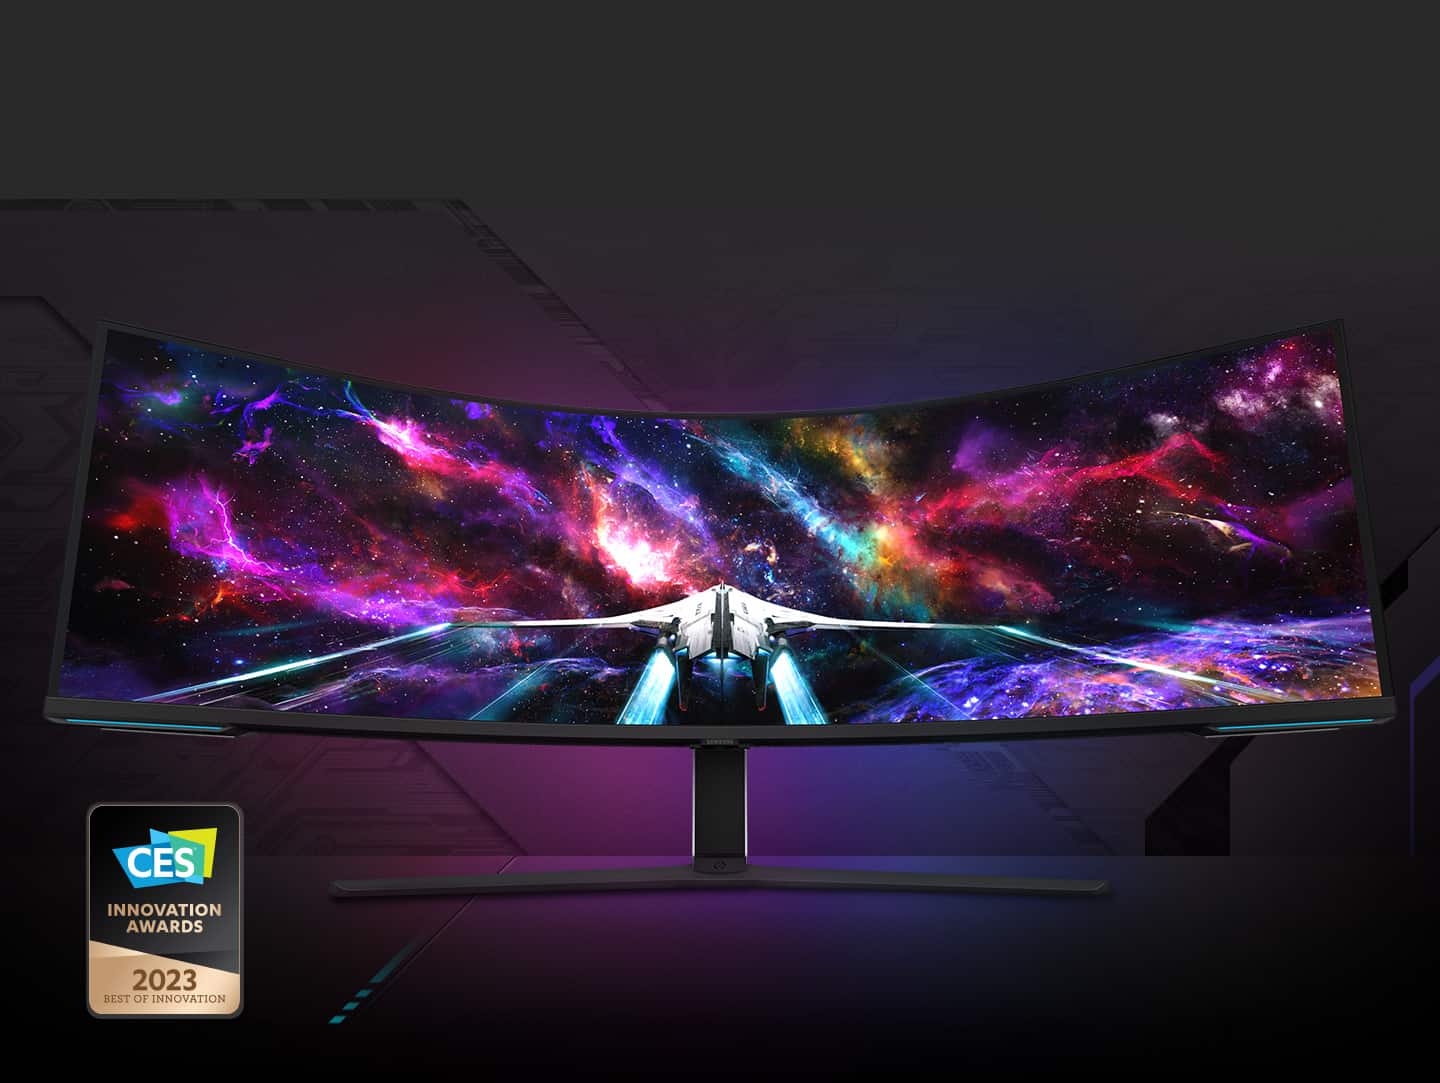 Samsung's 57-inch gaming monitor now has a price